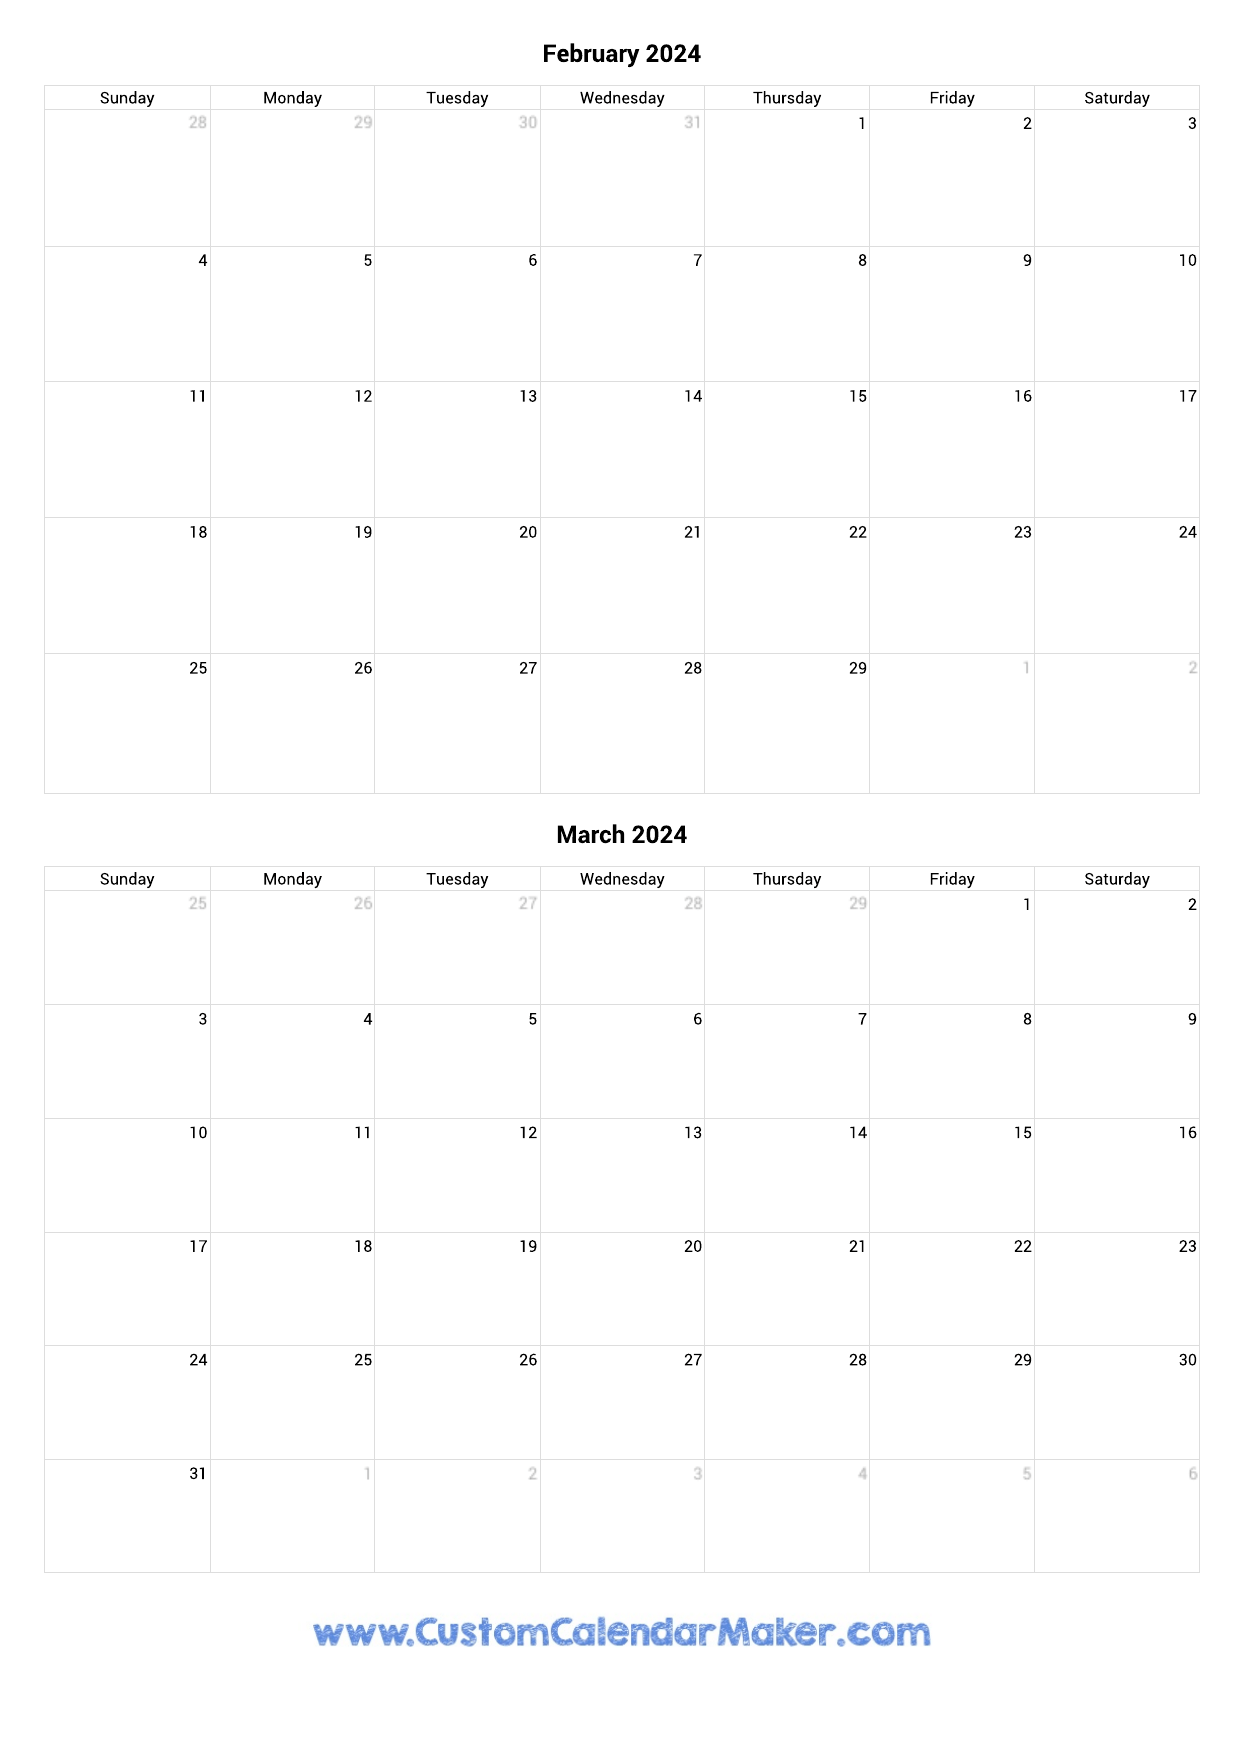 February And March 2024 Calendar for February And March 2024 Printable Calendar